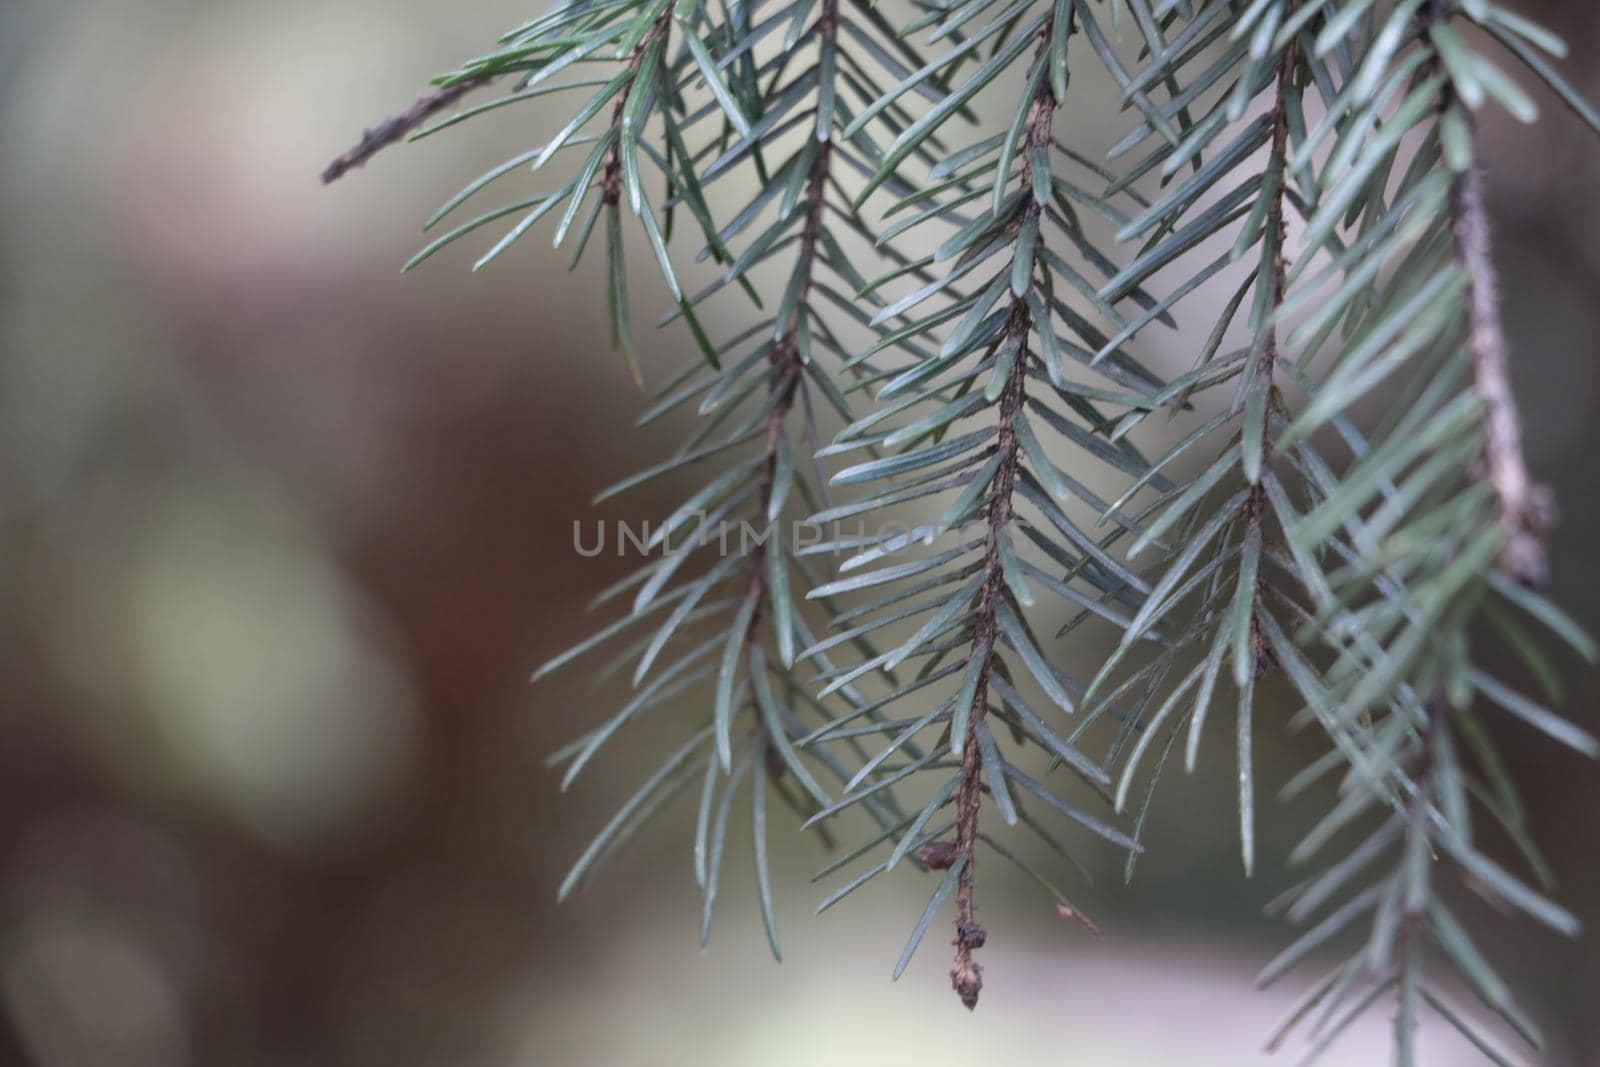 A young branch of pine or pine needles in the forest